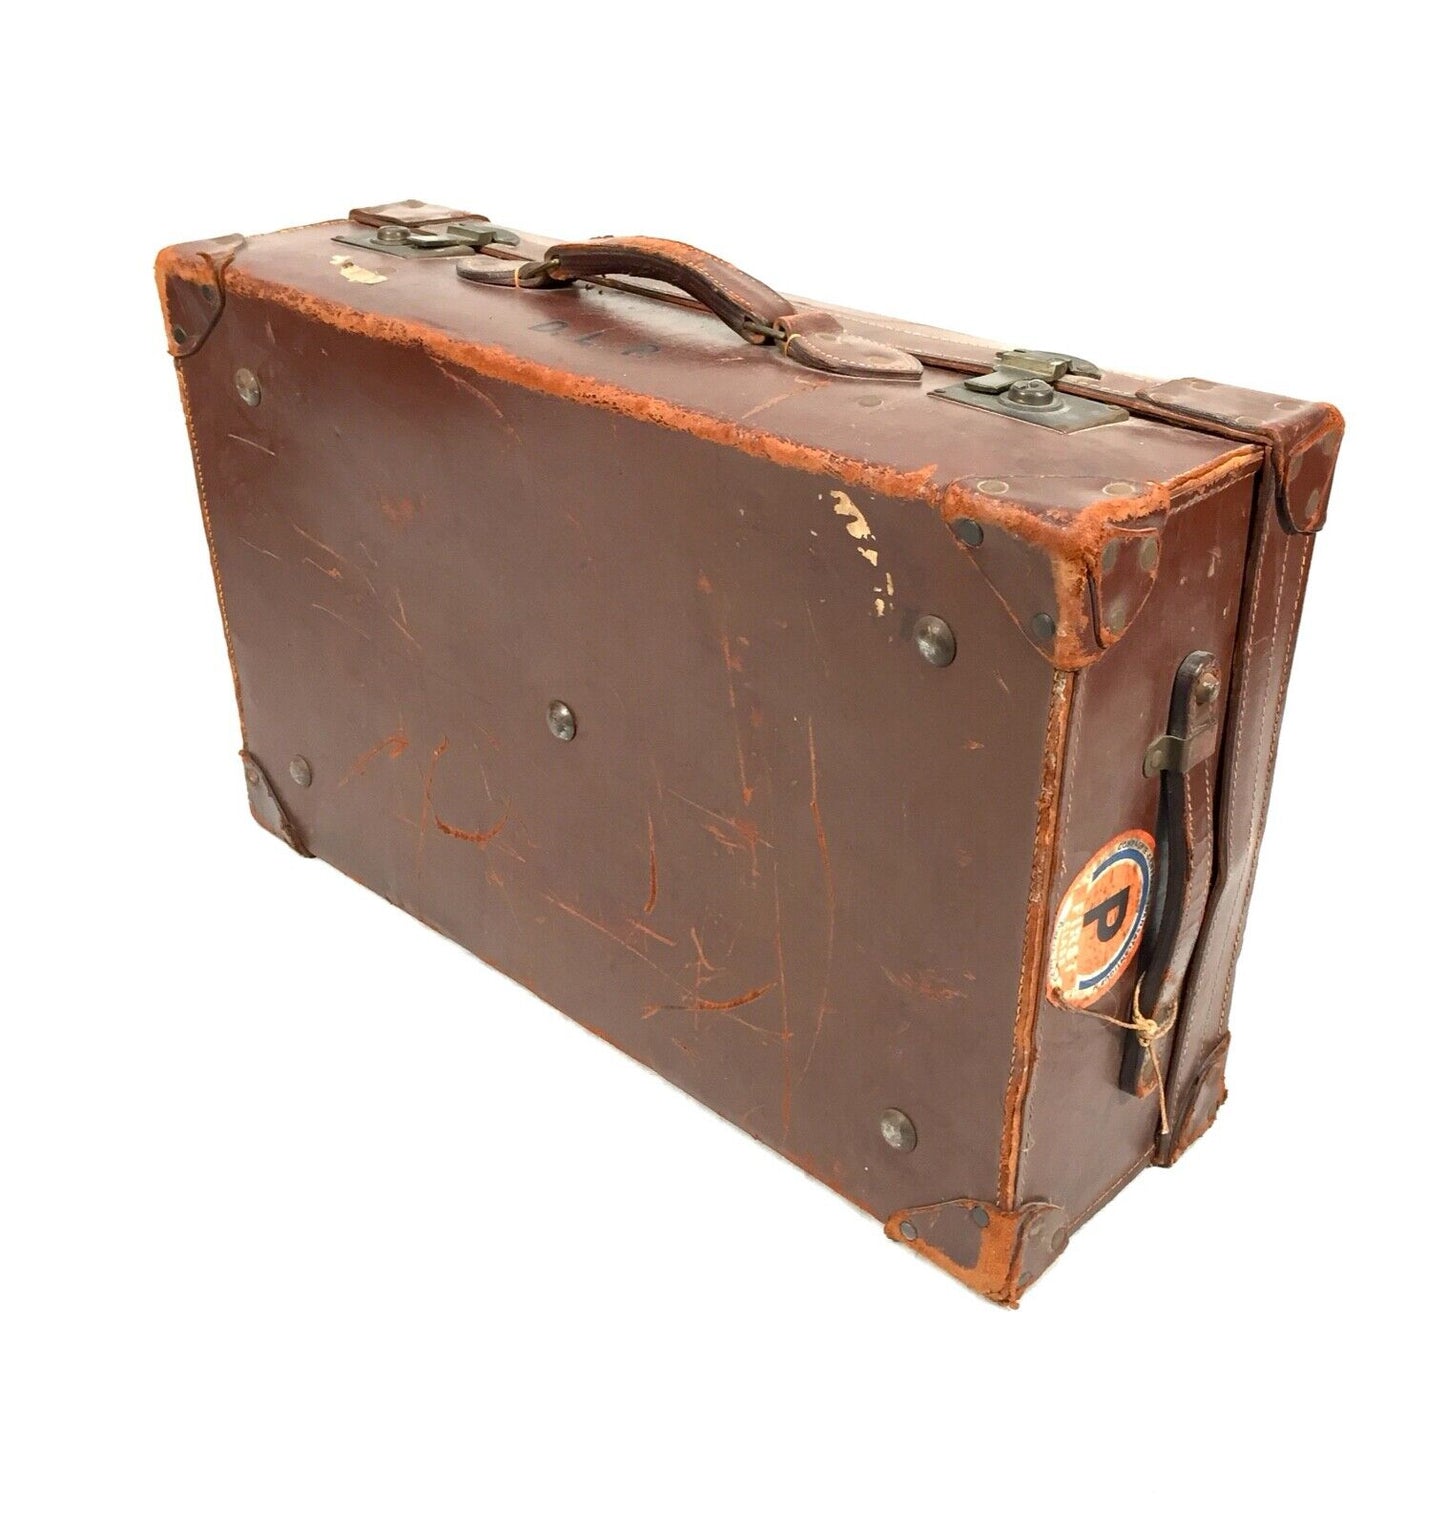 Antique Leather Gentleman's Travel Bag / Suitcase / Trunk with Travel Stickers .